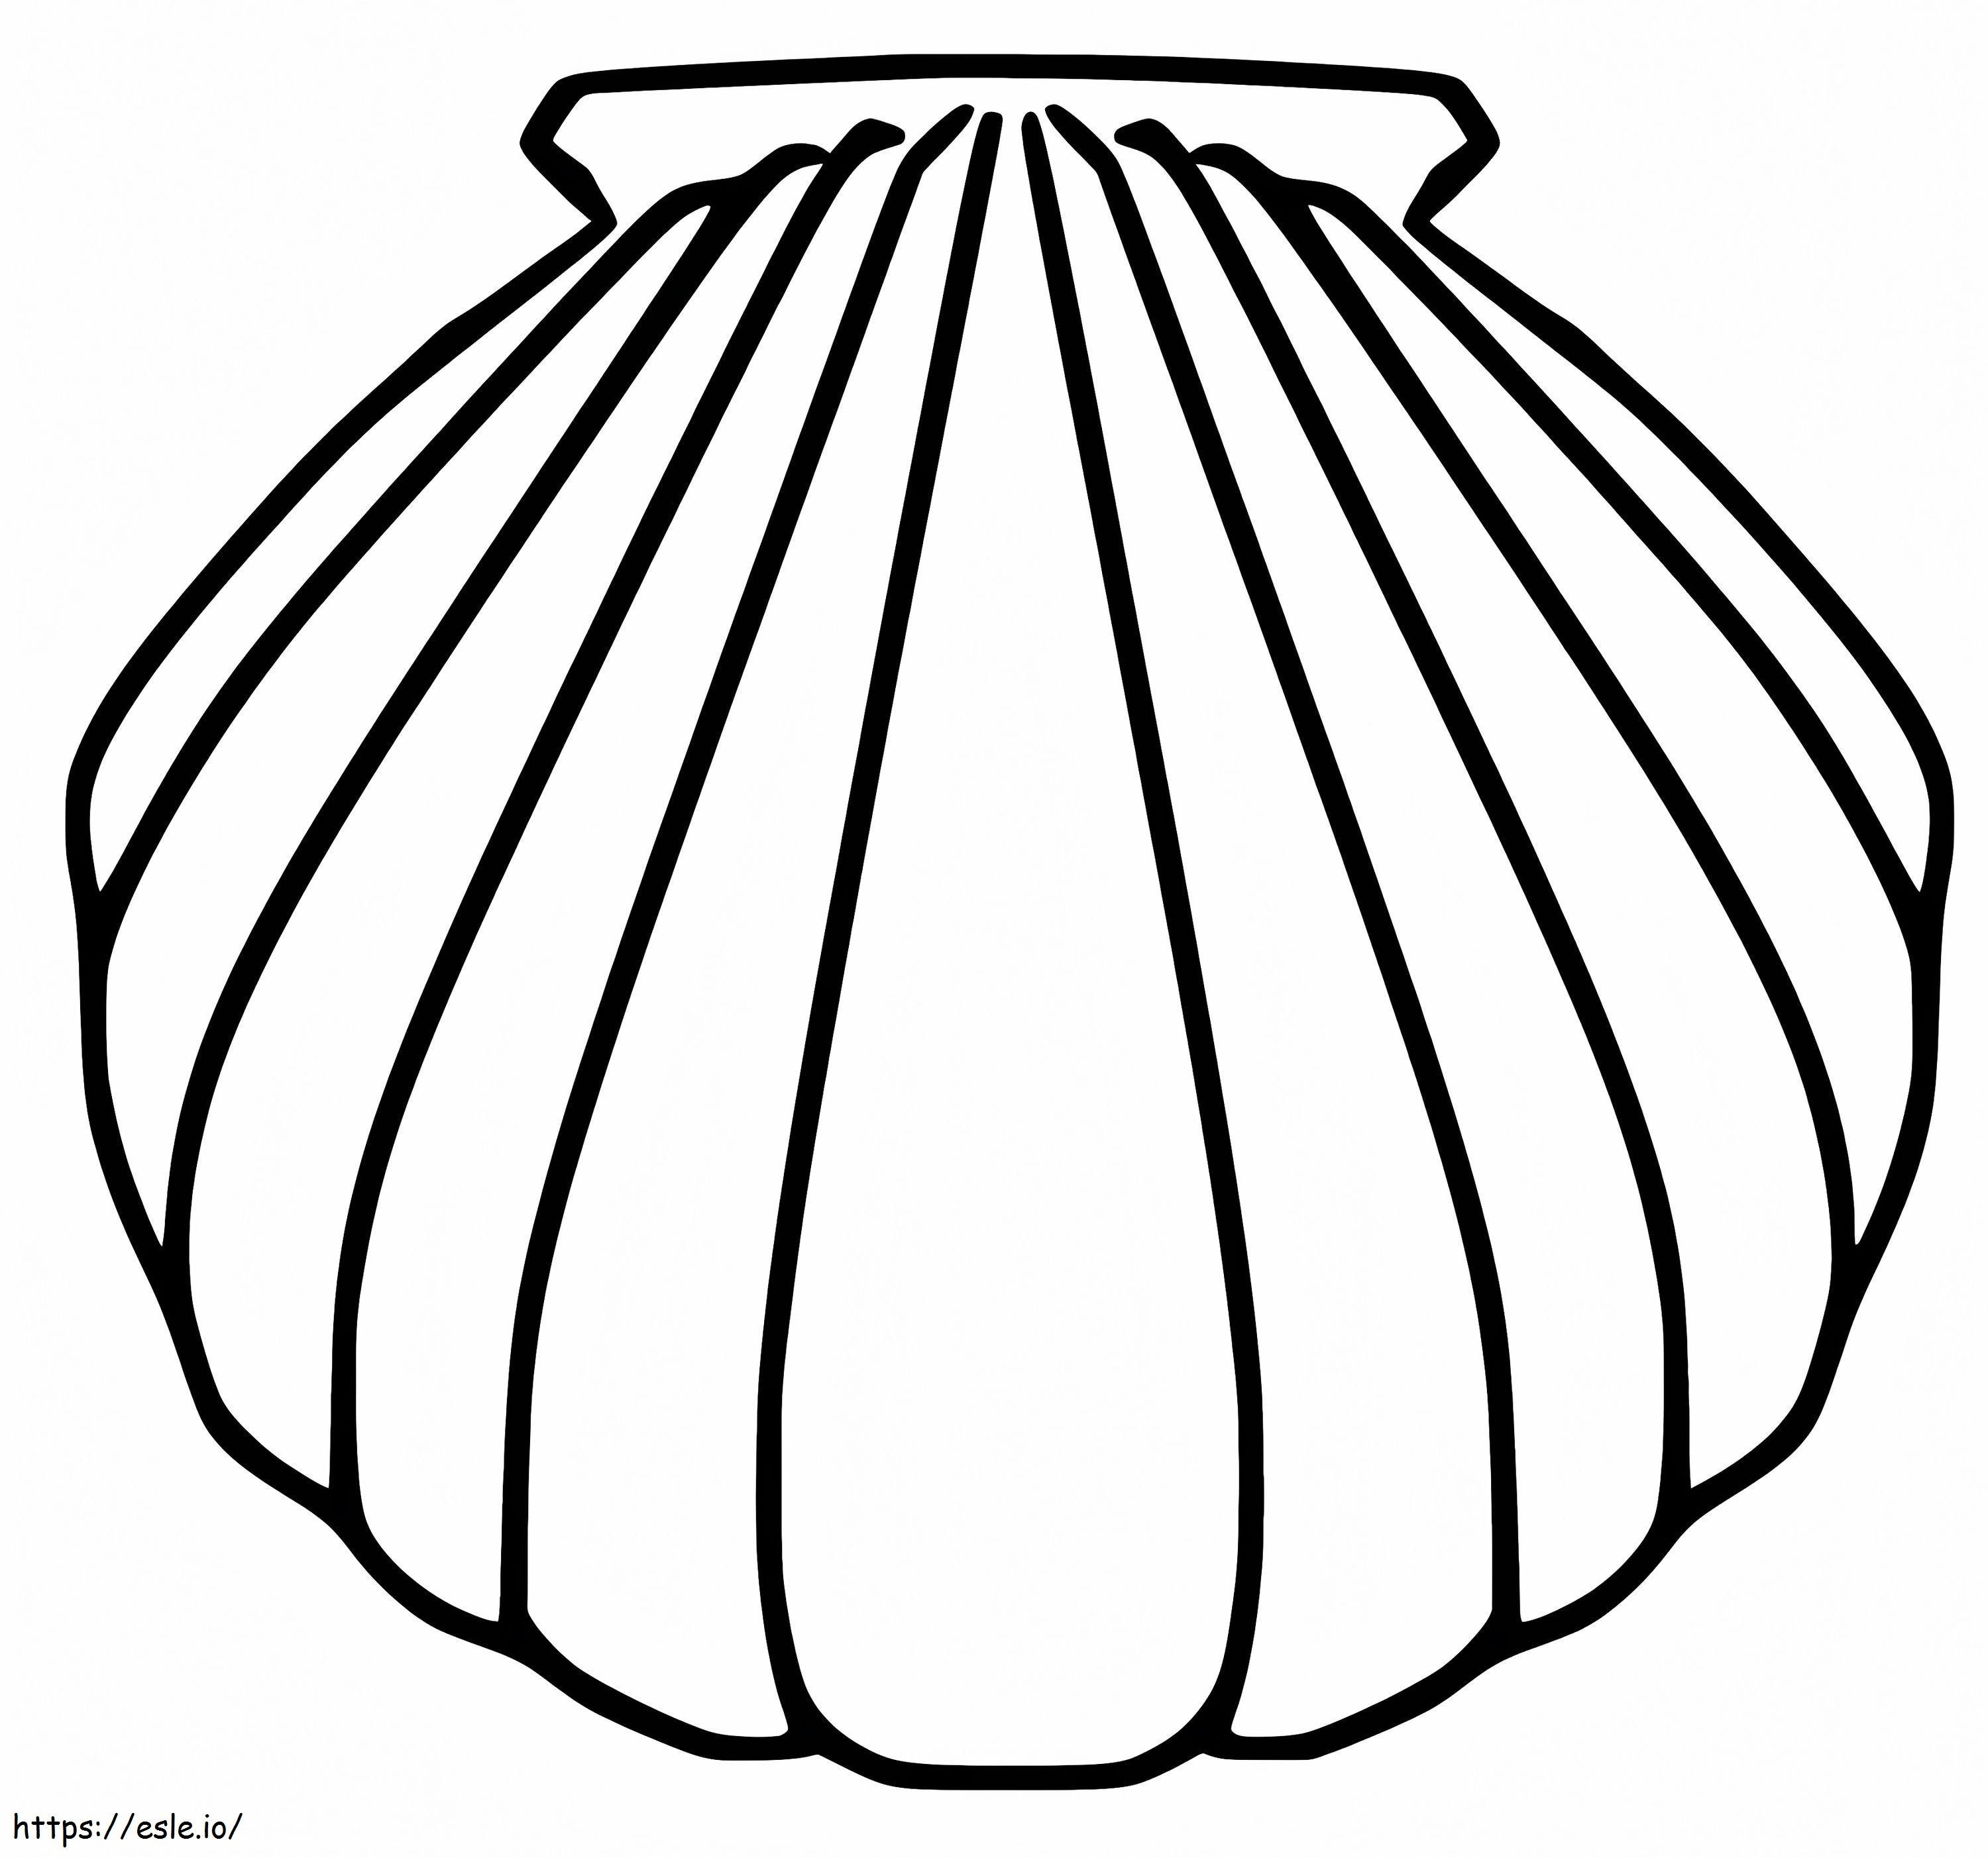 Scallop Shell 2 coloring page